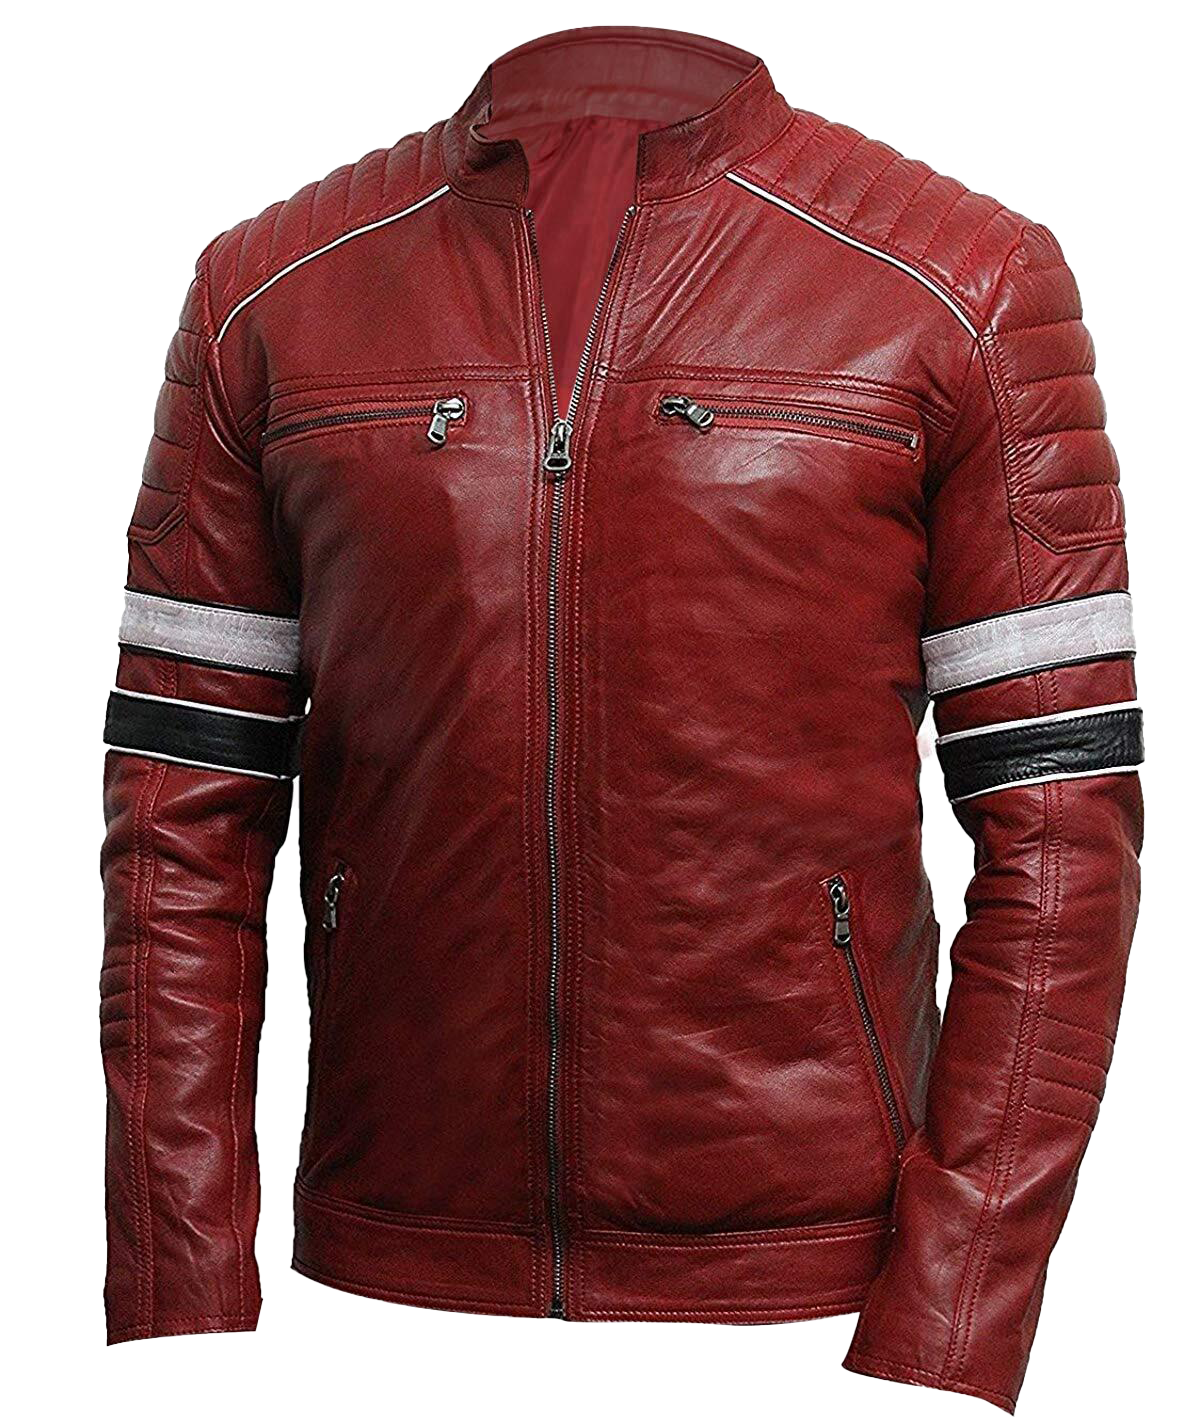 Cafe Racer Retro Distressed Motorcycle Leather Jacket | Cafe Racer Retro Motorcycle Leather Jacket - Button Stitched